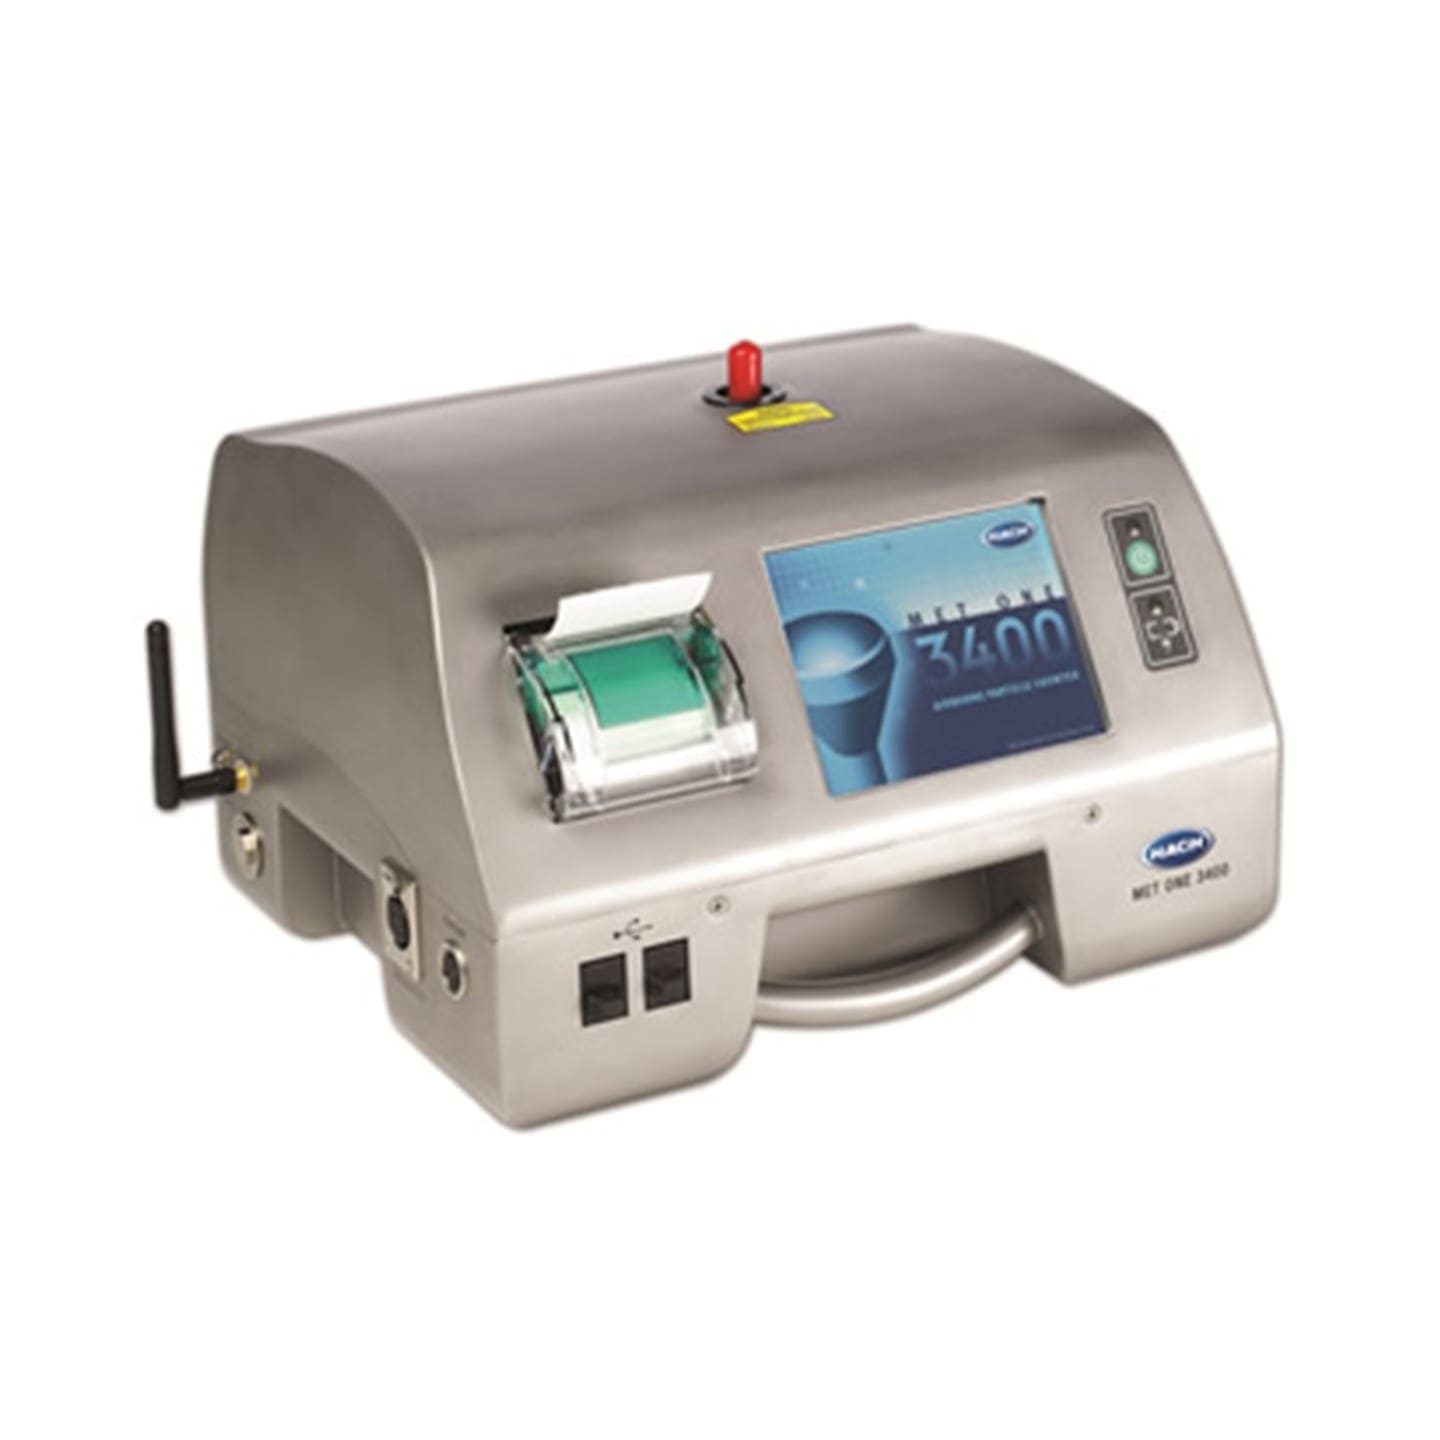 Hach Met One 3445 Particle Counter - Rental/Hire - Ashtead Technology